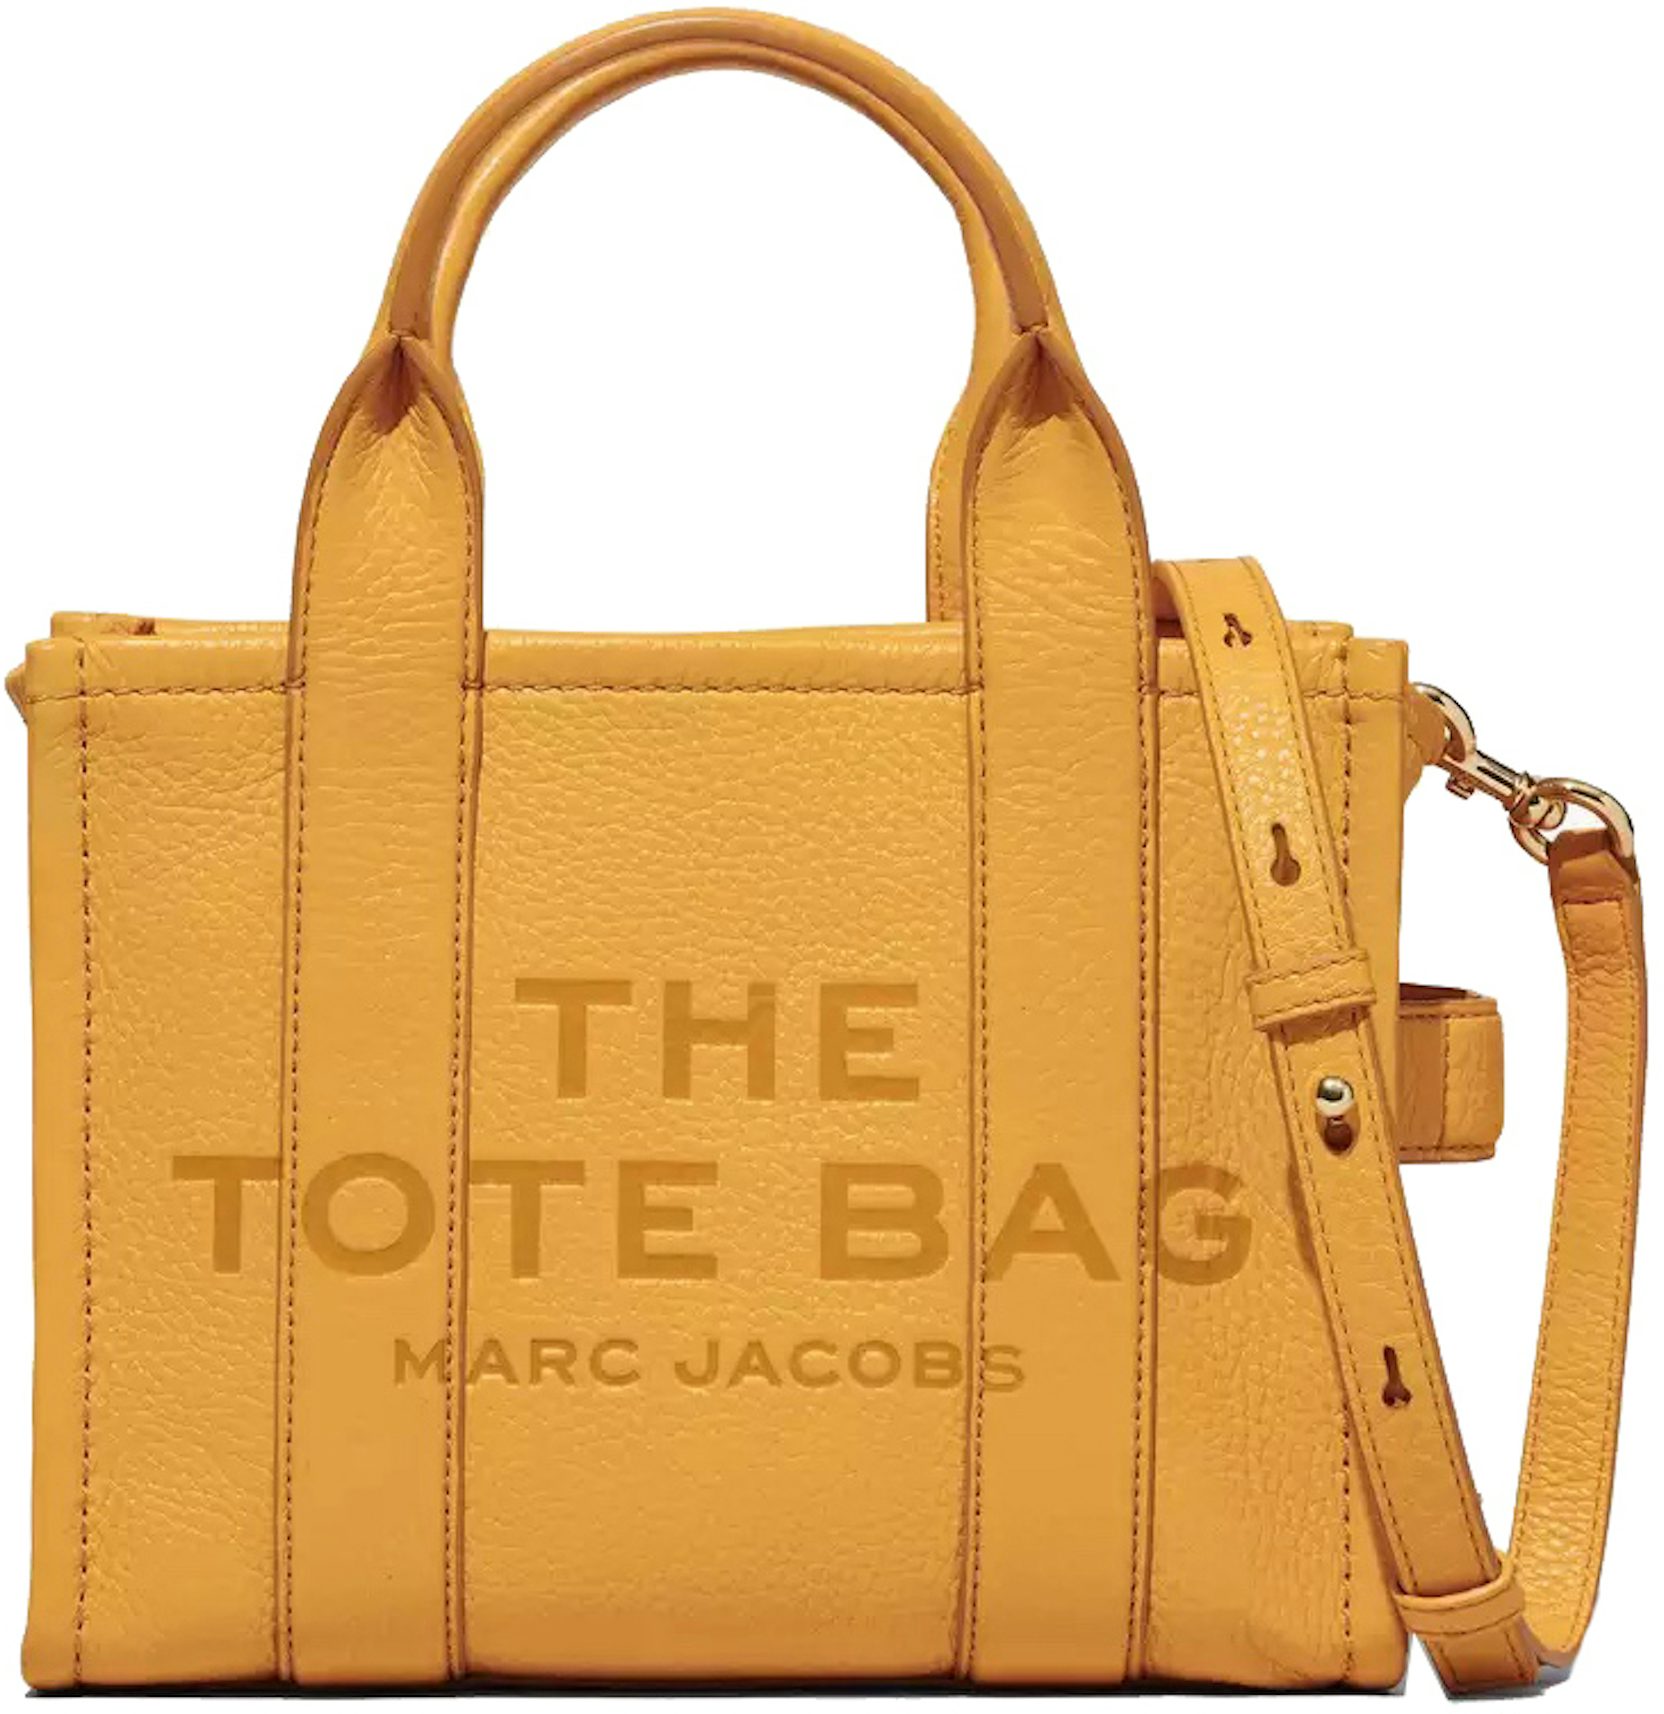 Marc Jacobs The Leather Mini Tote Bag ARGAN OIL (Brown